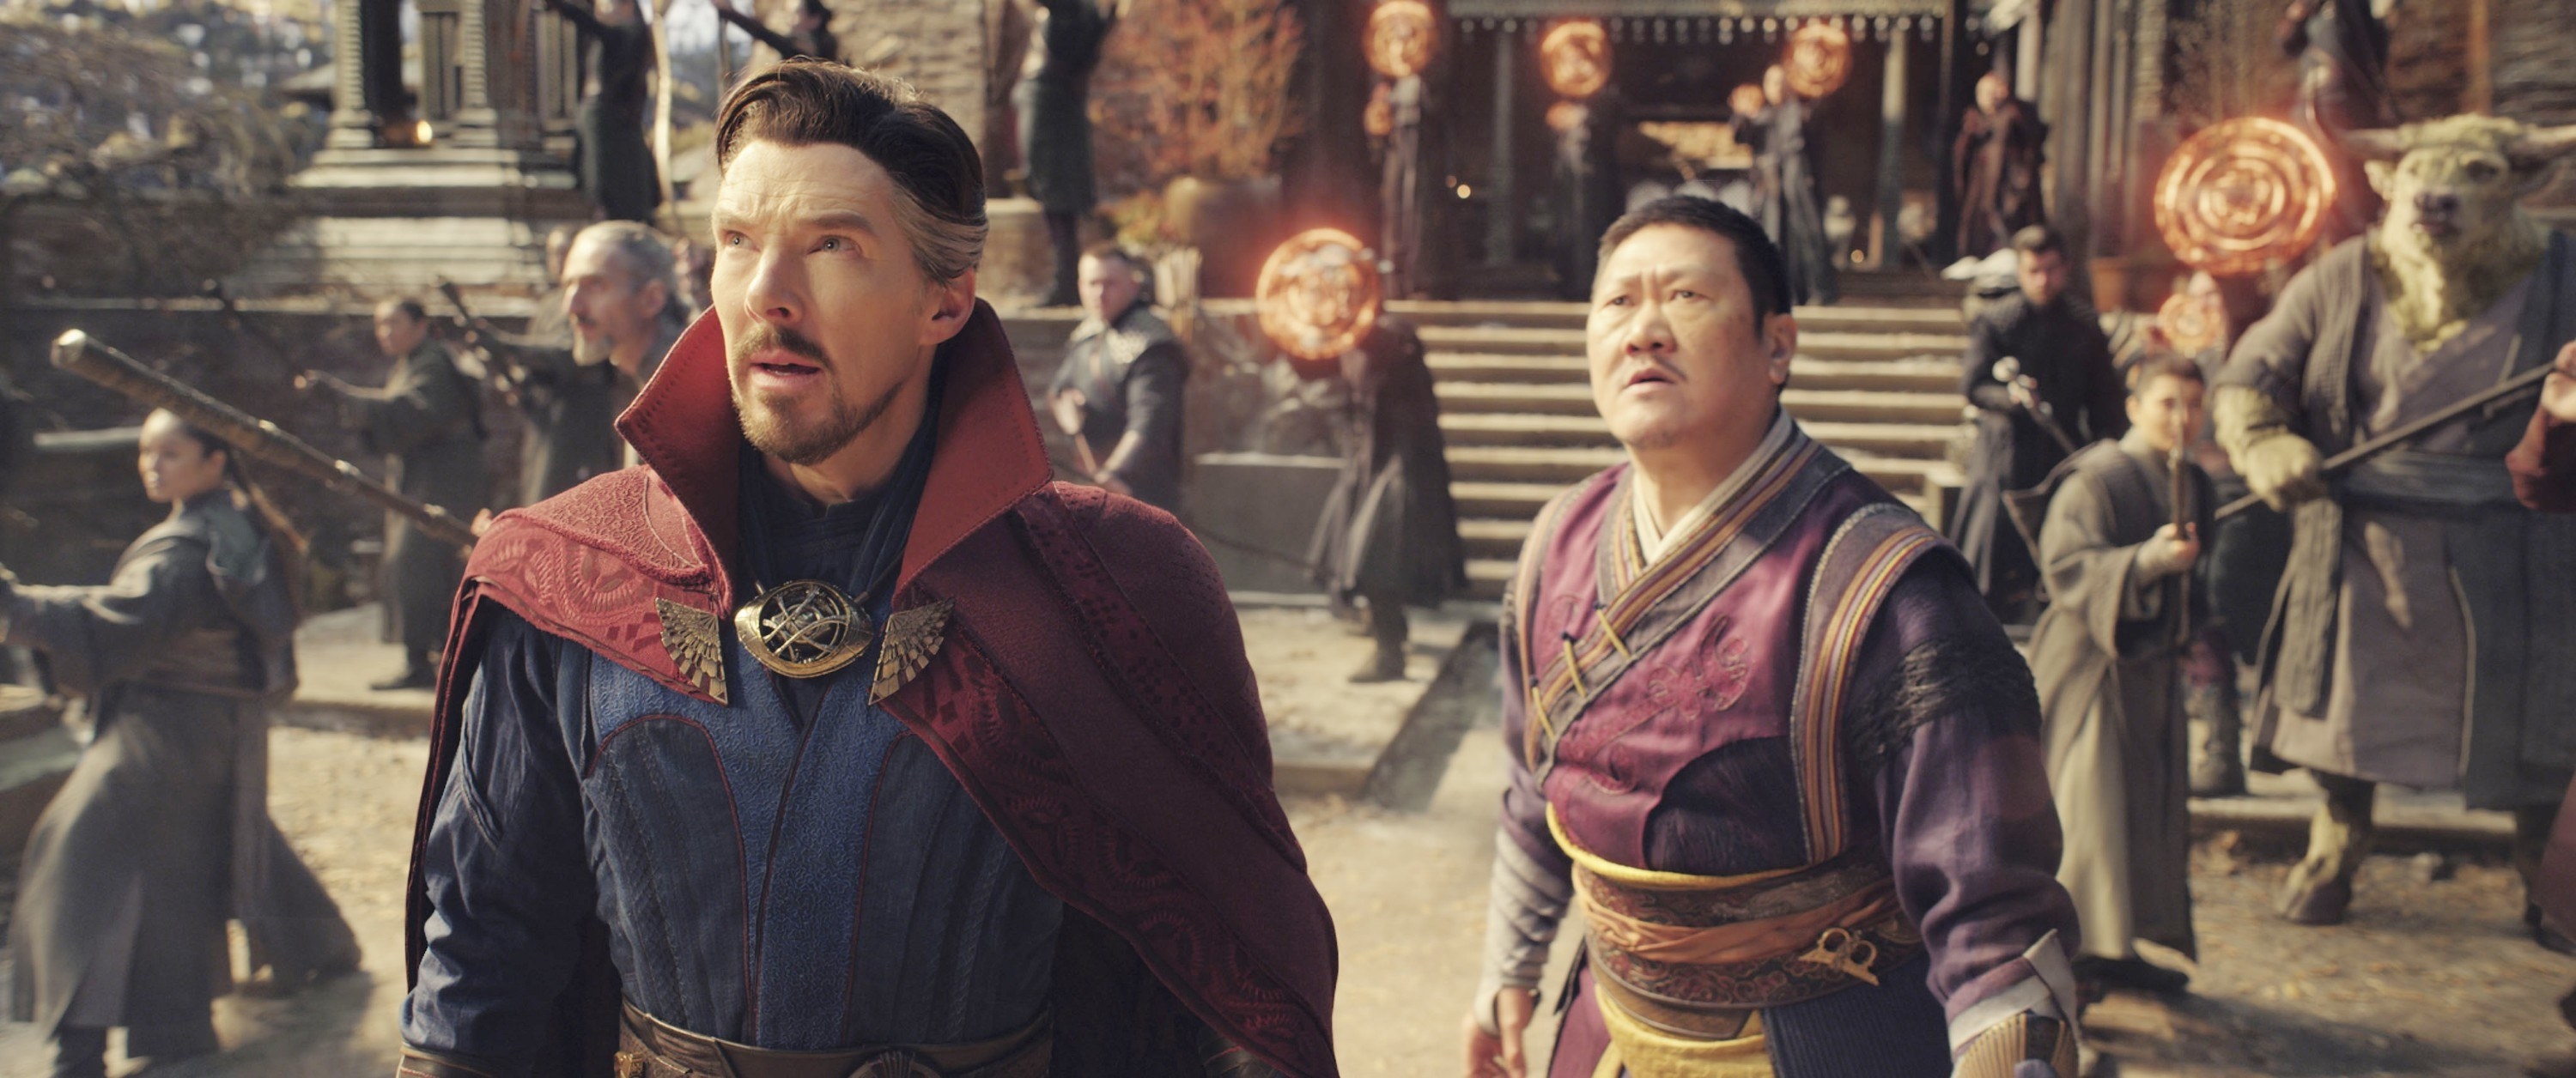 Benedict Cumberbatch as Dr. Stephen Strange, Benedict Wong as Wong looking up at the sky